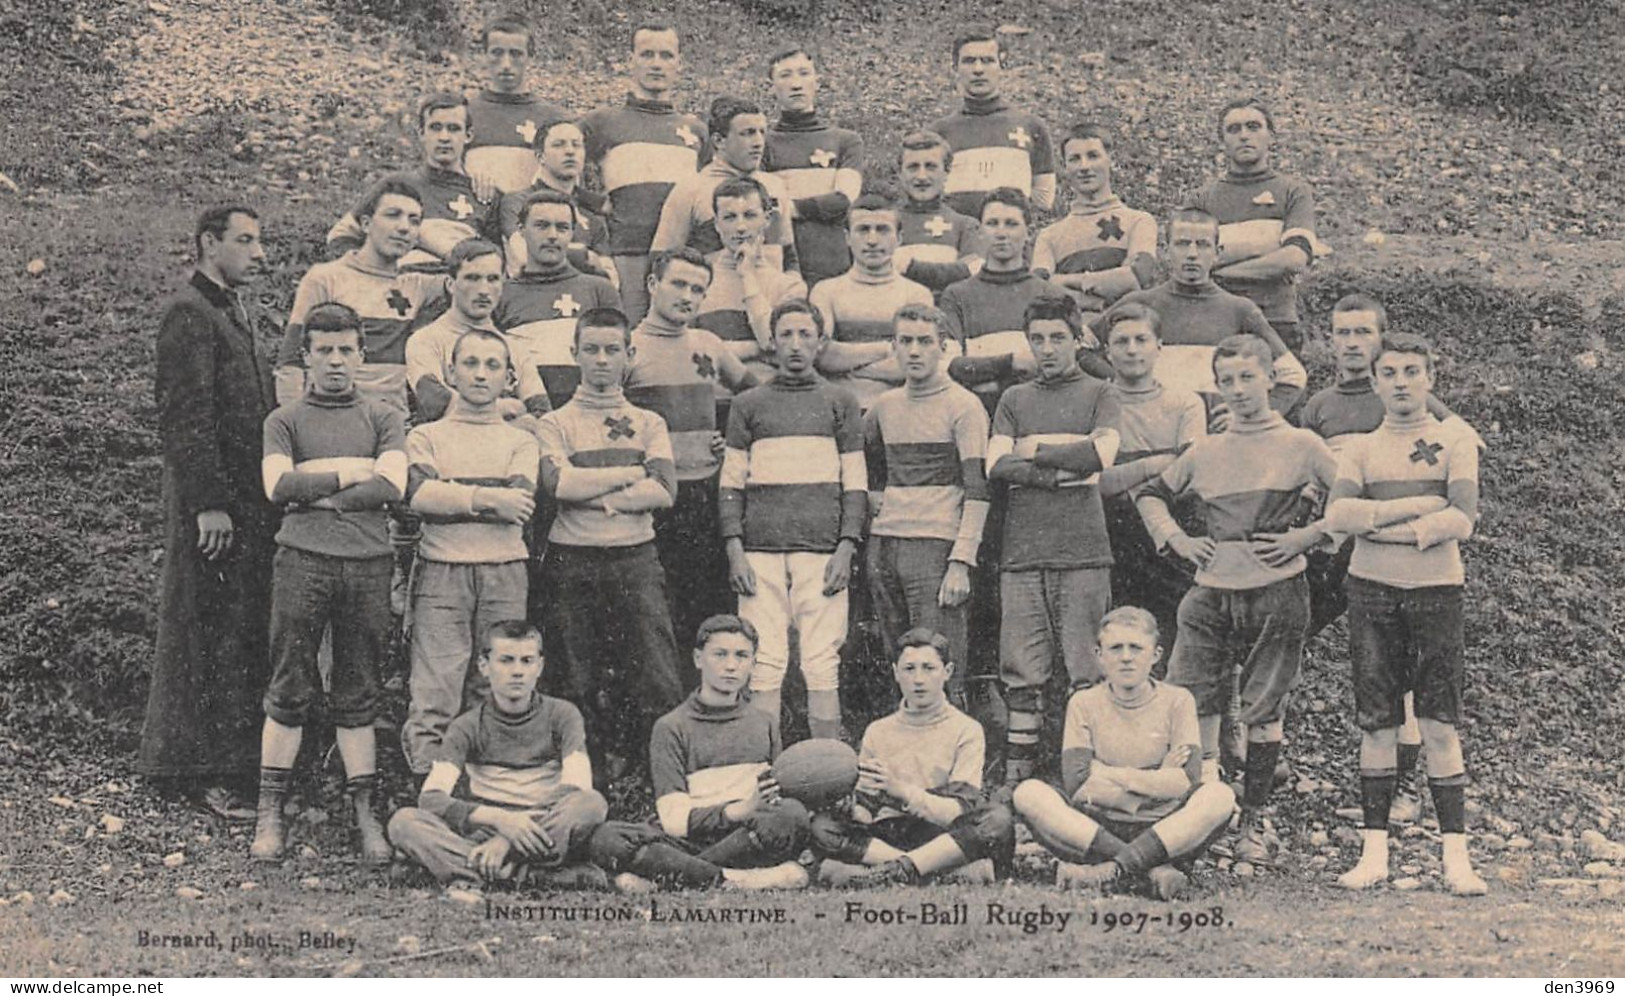 BELLEY (Ain) - Institution Lamartine - Foot-Ball Rugby 1907-1908 - Belley